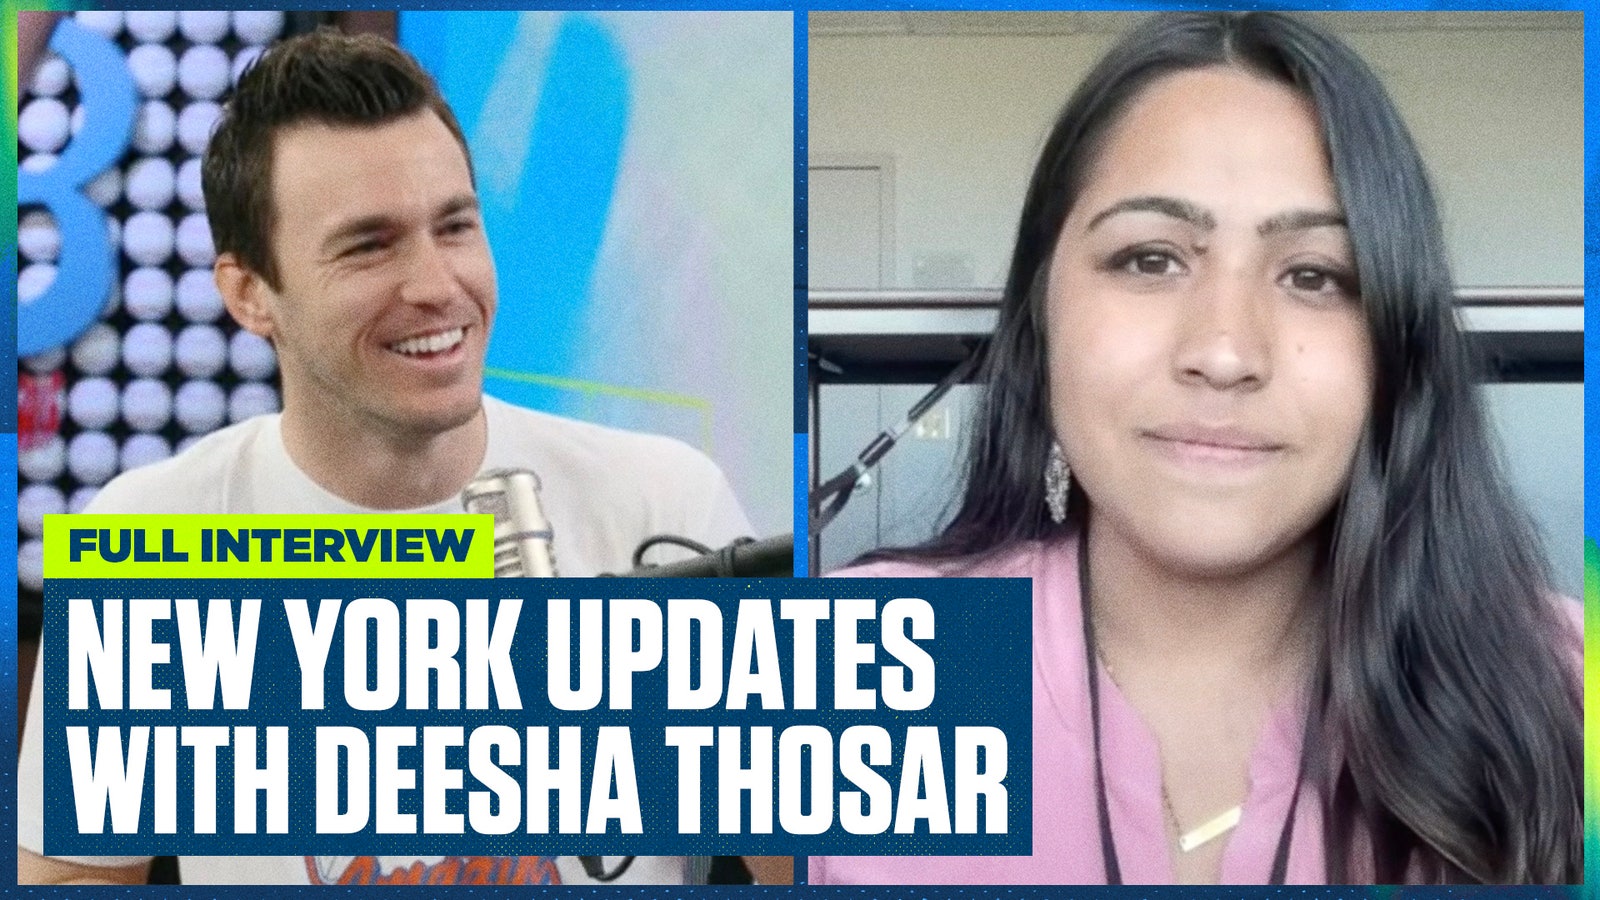 New York Yankees and Mets Spring Training updates with Deesha Thosar